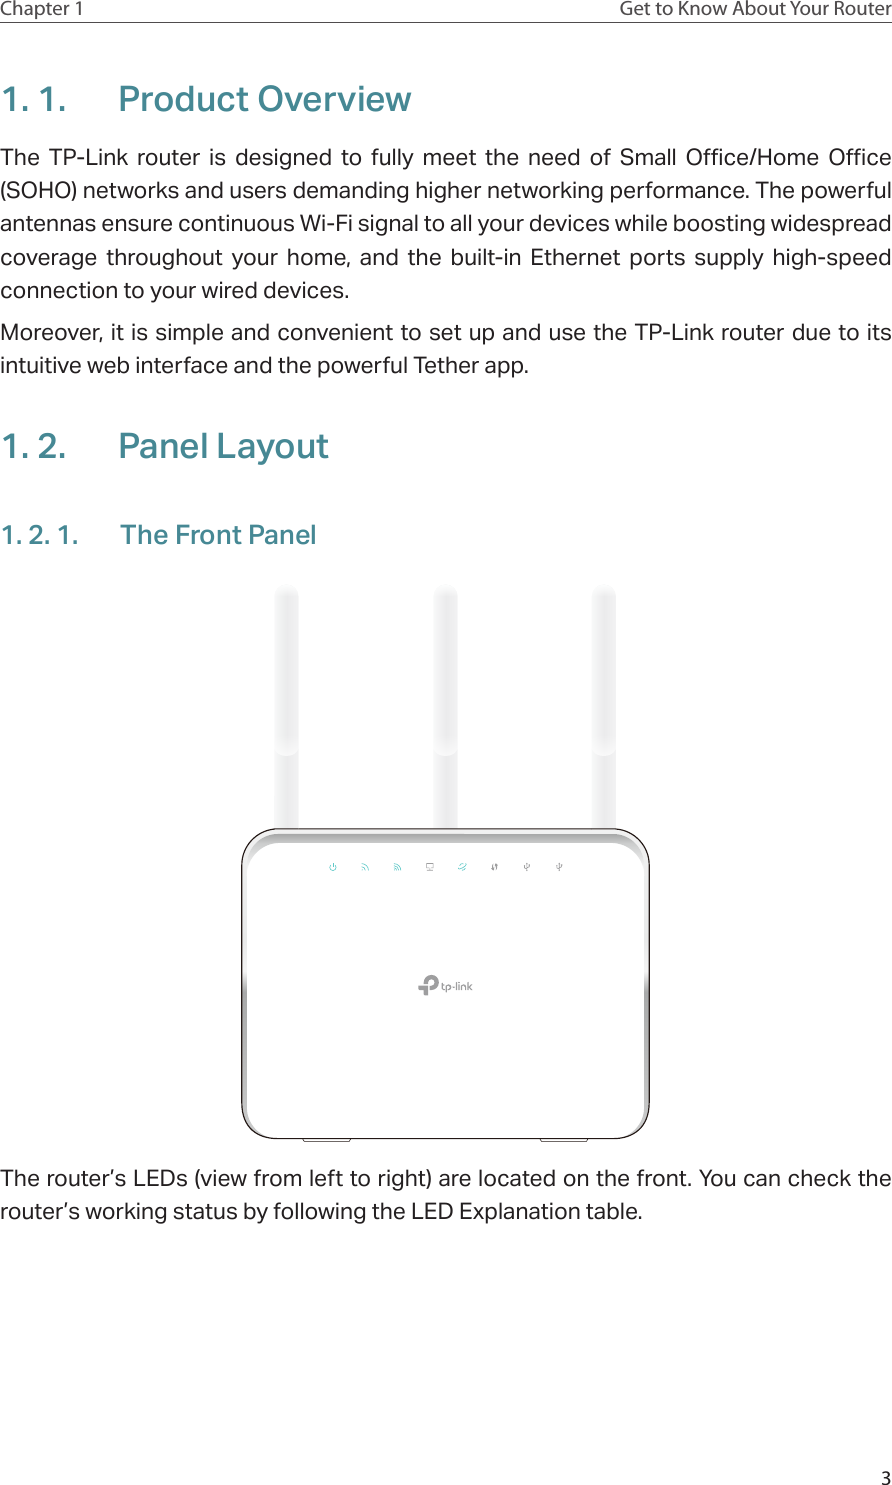 3Chapter 1 Get to Know About Your Router1. 1.  Product OverviewThe TP-Link router is designed to fully meet the need of Small Office/Home Office (SOHO) networks and users demanding higher networking performance. The powerful antennas ensure continuous Wi-Fi signal to all your devices while boosting widespread coverage throughout your home, and the built-in Ethernet ports supply high-speed connection to your wired devices.Moreover, it is simple and convenient to set up and use the TP-Link router due to its intuitive web interface and the powerful Tether app.  1. 2.  Panel Layout1. 2. 1.  The Front PanelThe router’s LEDs (view from left to right) are located on the front. You can check the router’s working status by following the LED Explanation table.